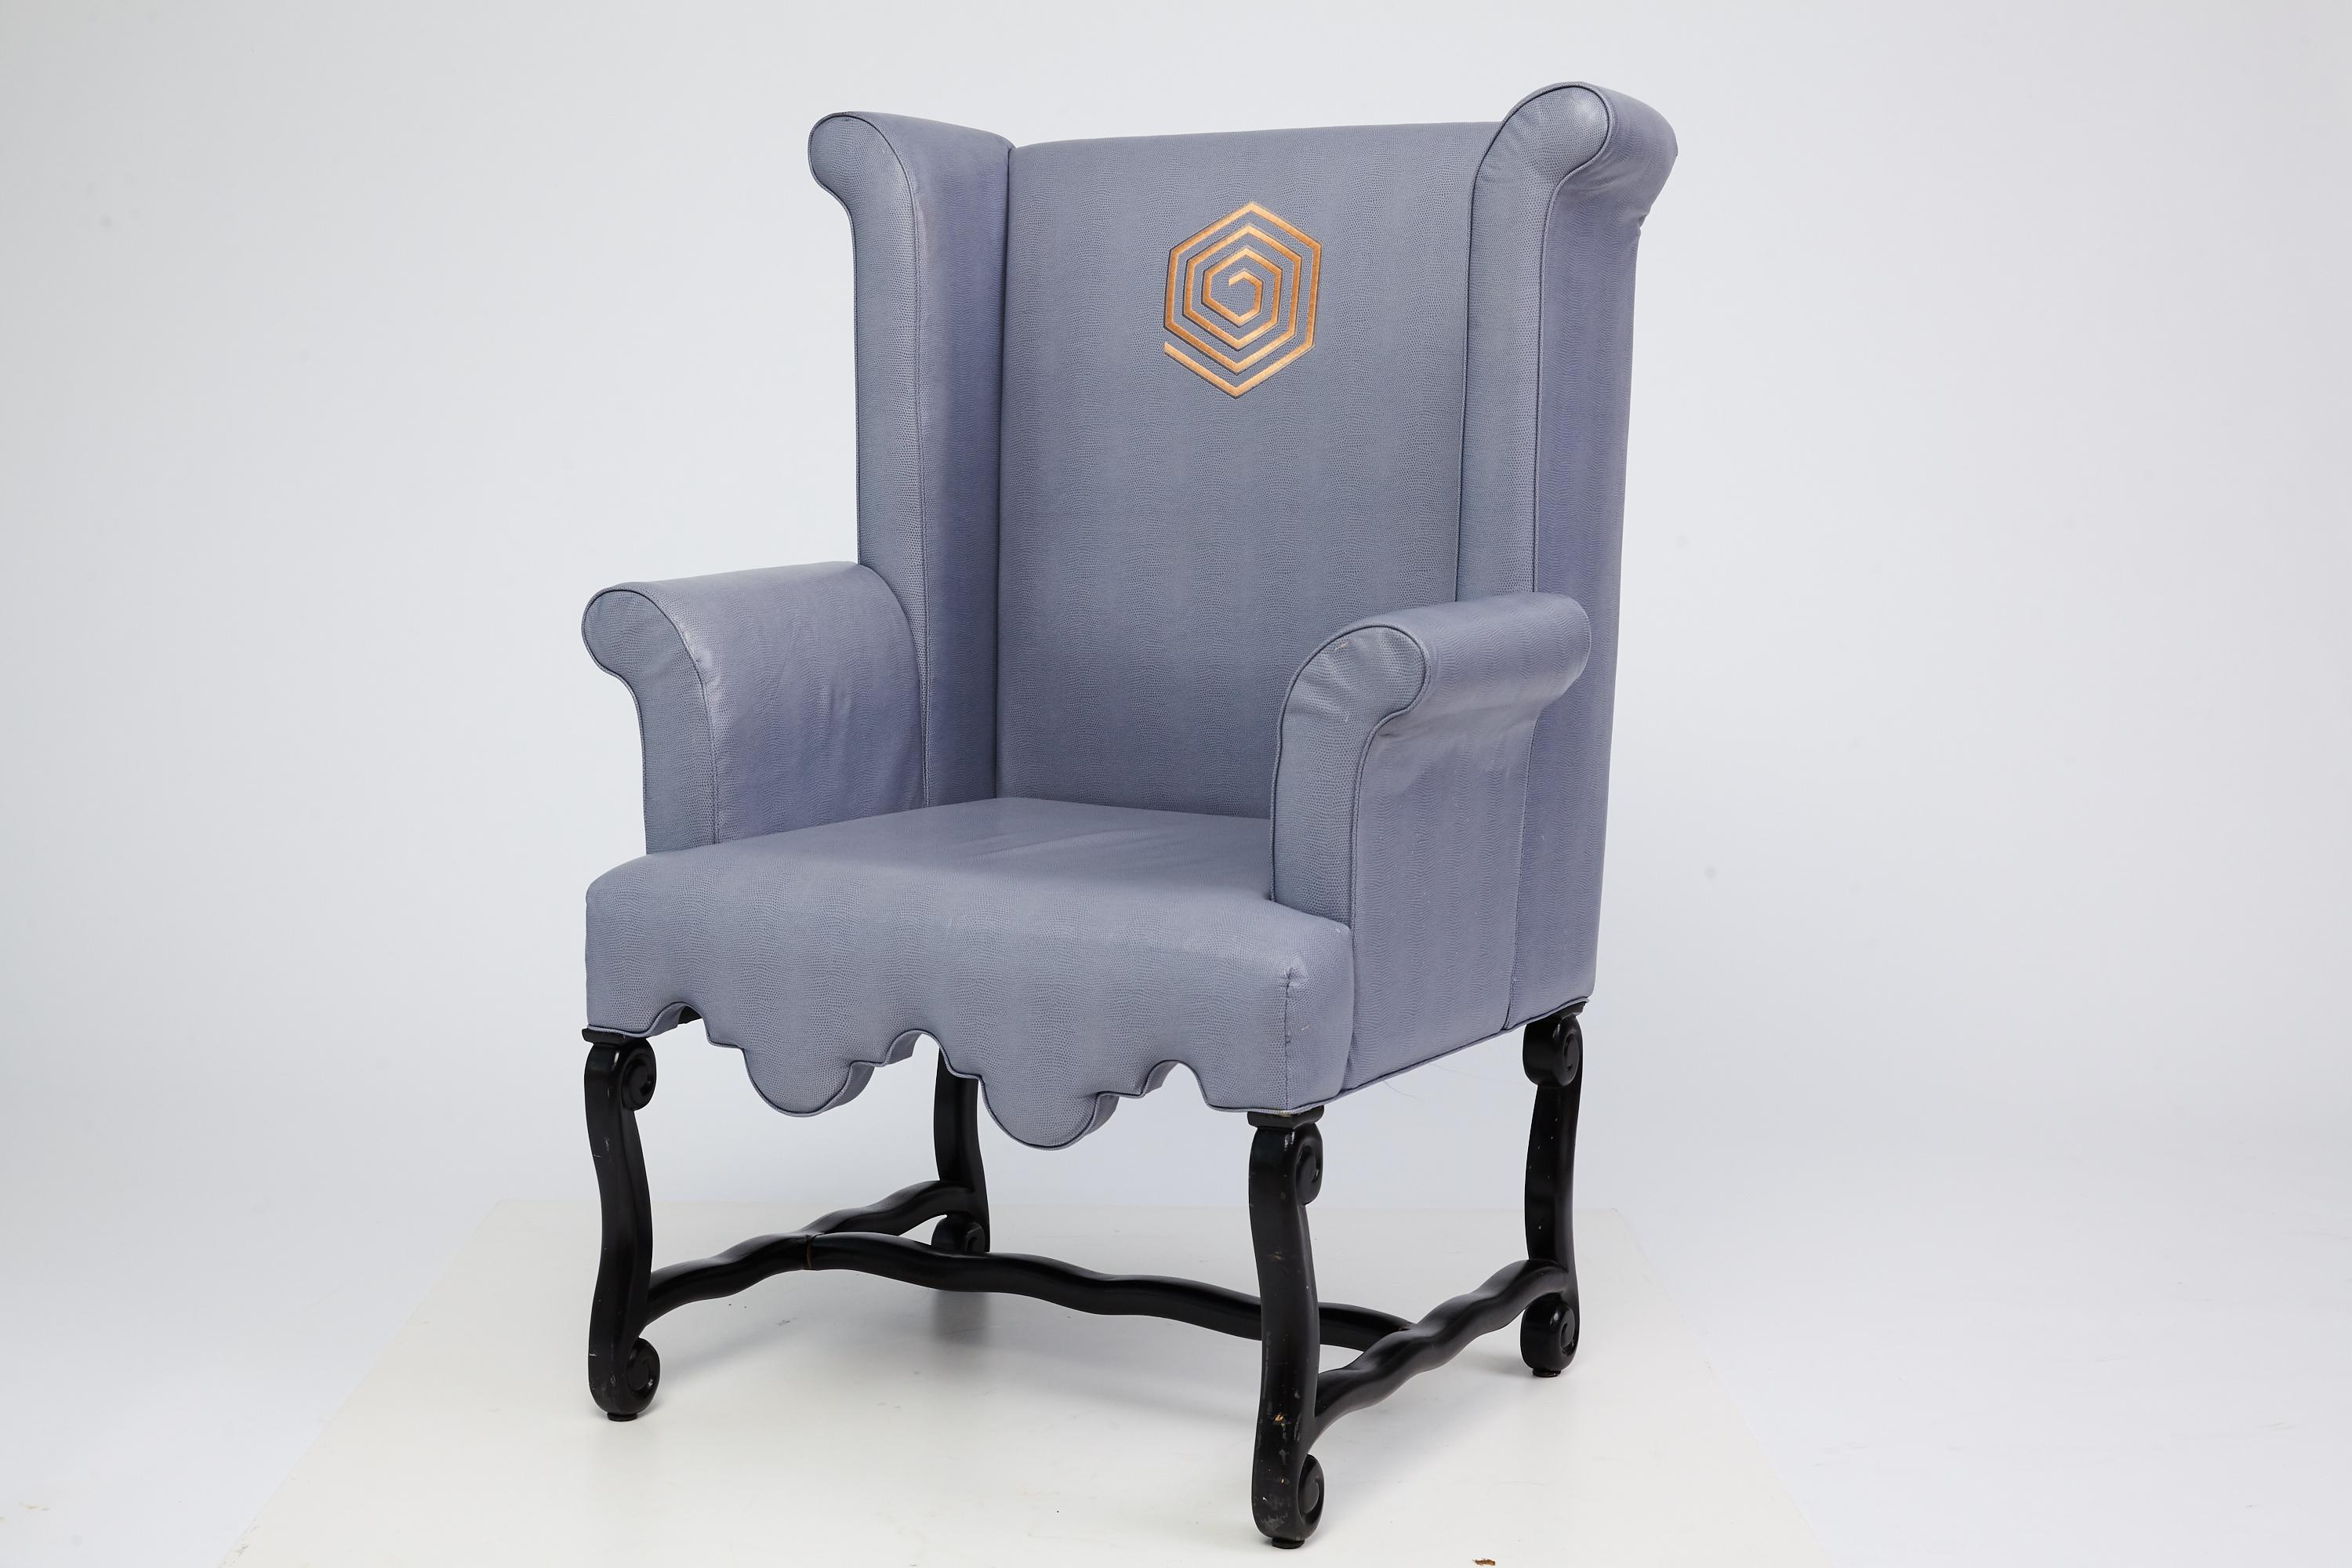 Custom Wingback Chairs by Kelly Wearstler Designed for the Viceroy Miami 3